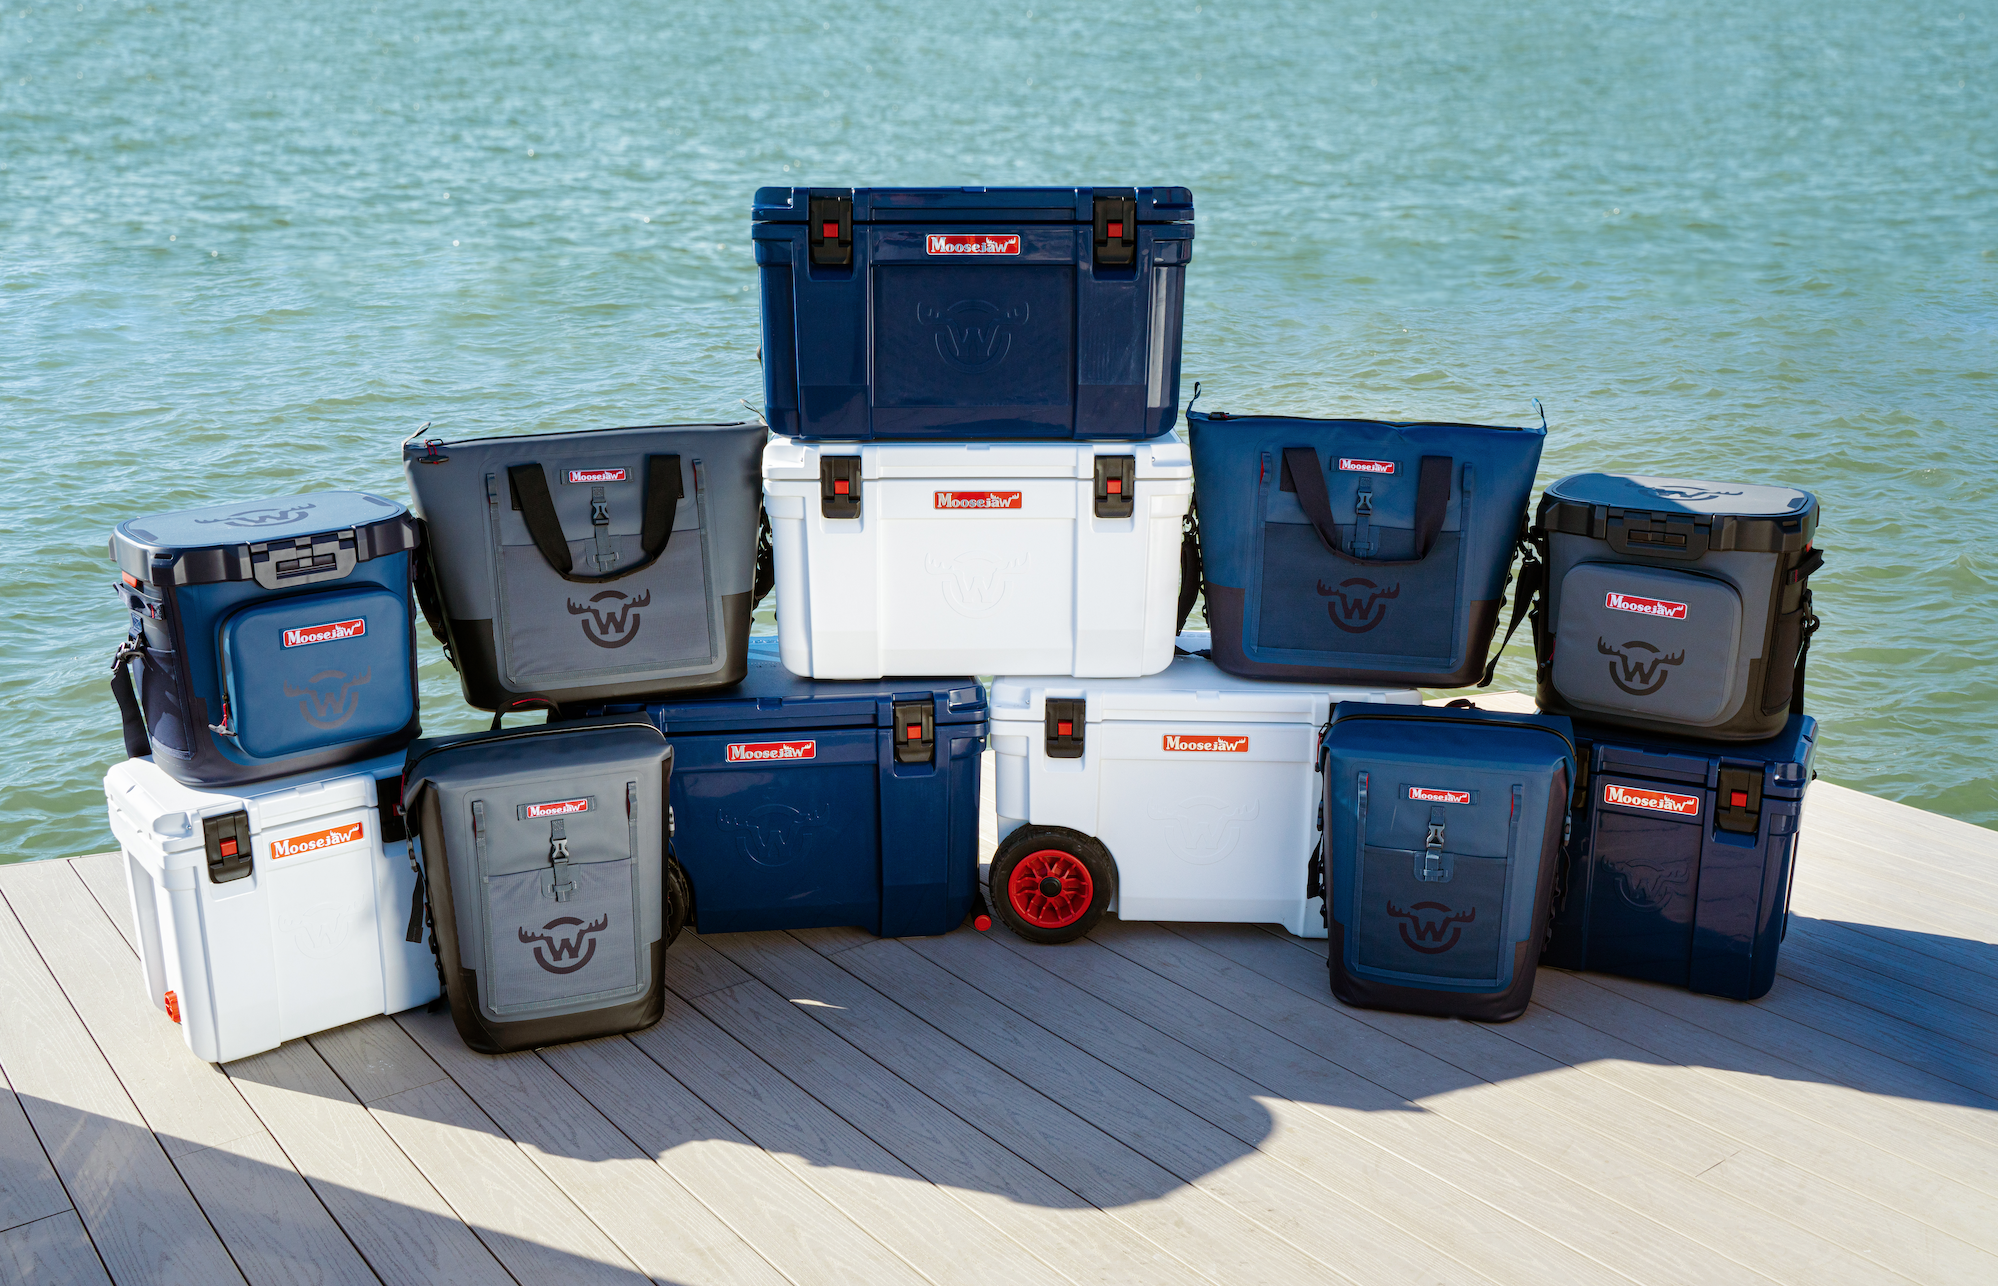 https://www.outdoorsportswire.com/wp-content/uploads/2023/02/MJ-Coolers.png